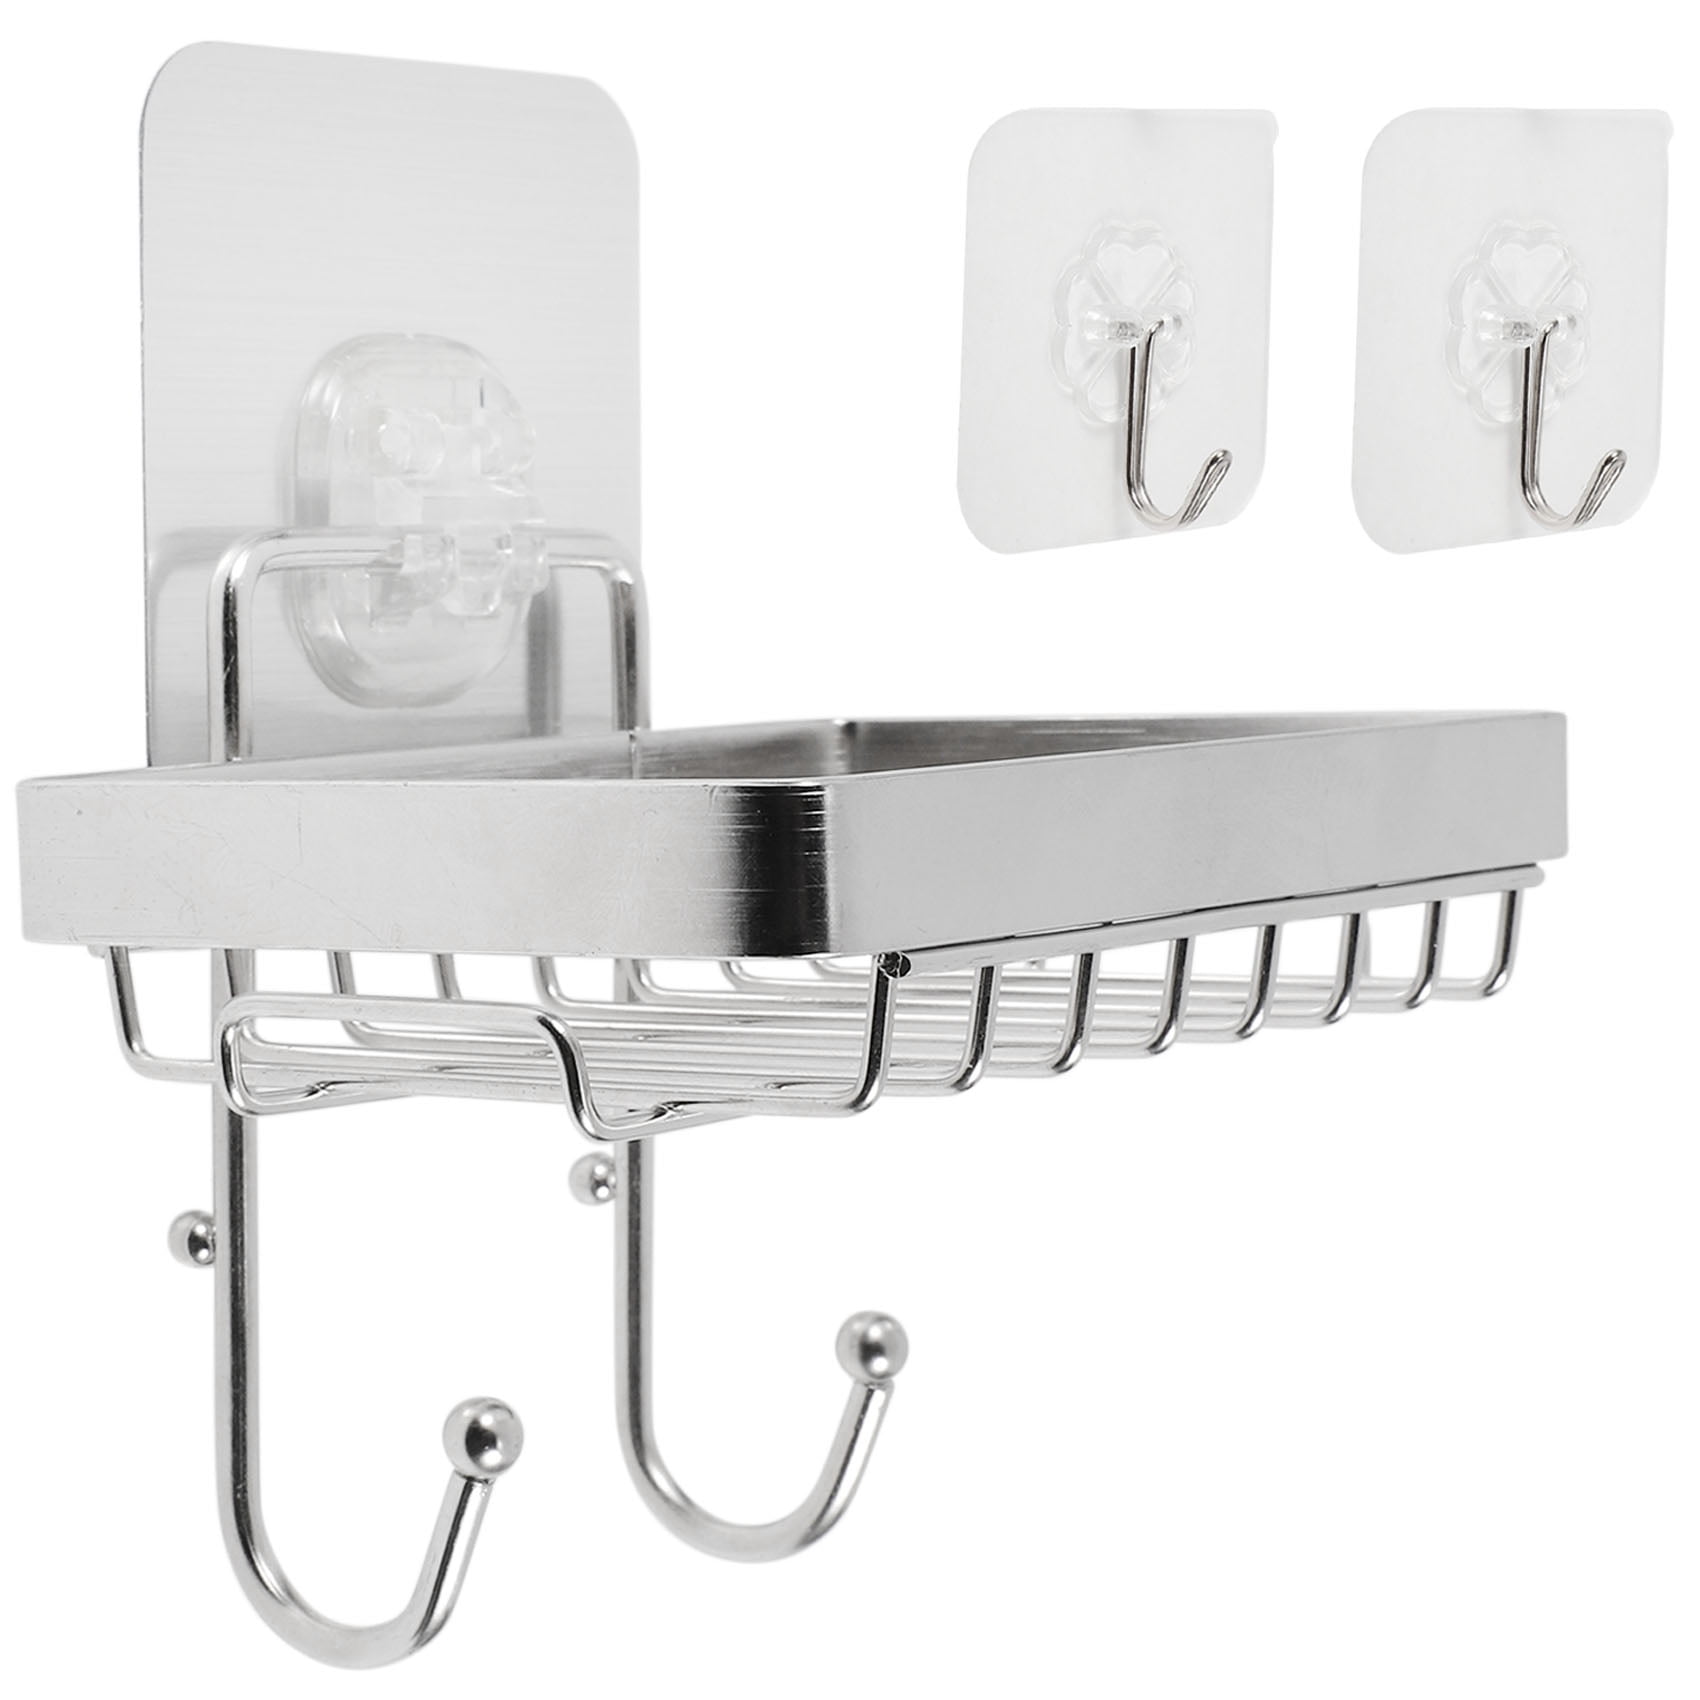 TSV Double Tier Soap Dish, Stainless Steel Soap Holder with Hooks,  Non-Trace Adhesive no Drilling, Wall-Mounted Bar Soap Sponge Holder for  Shower Bathroom Kitchen Silver 